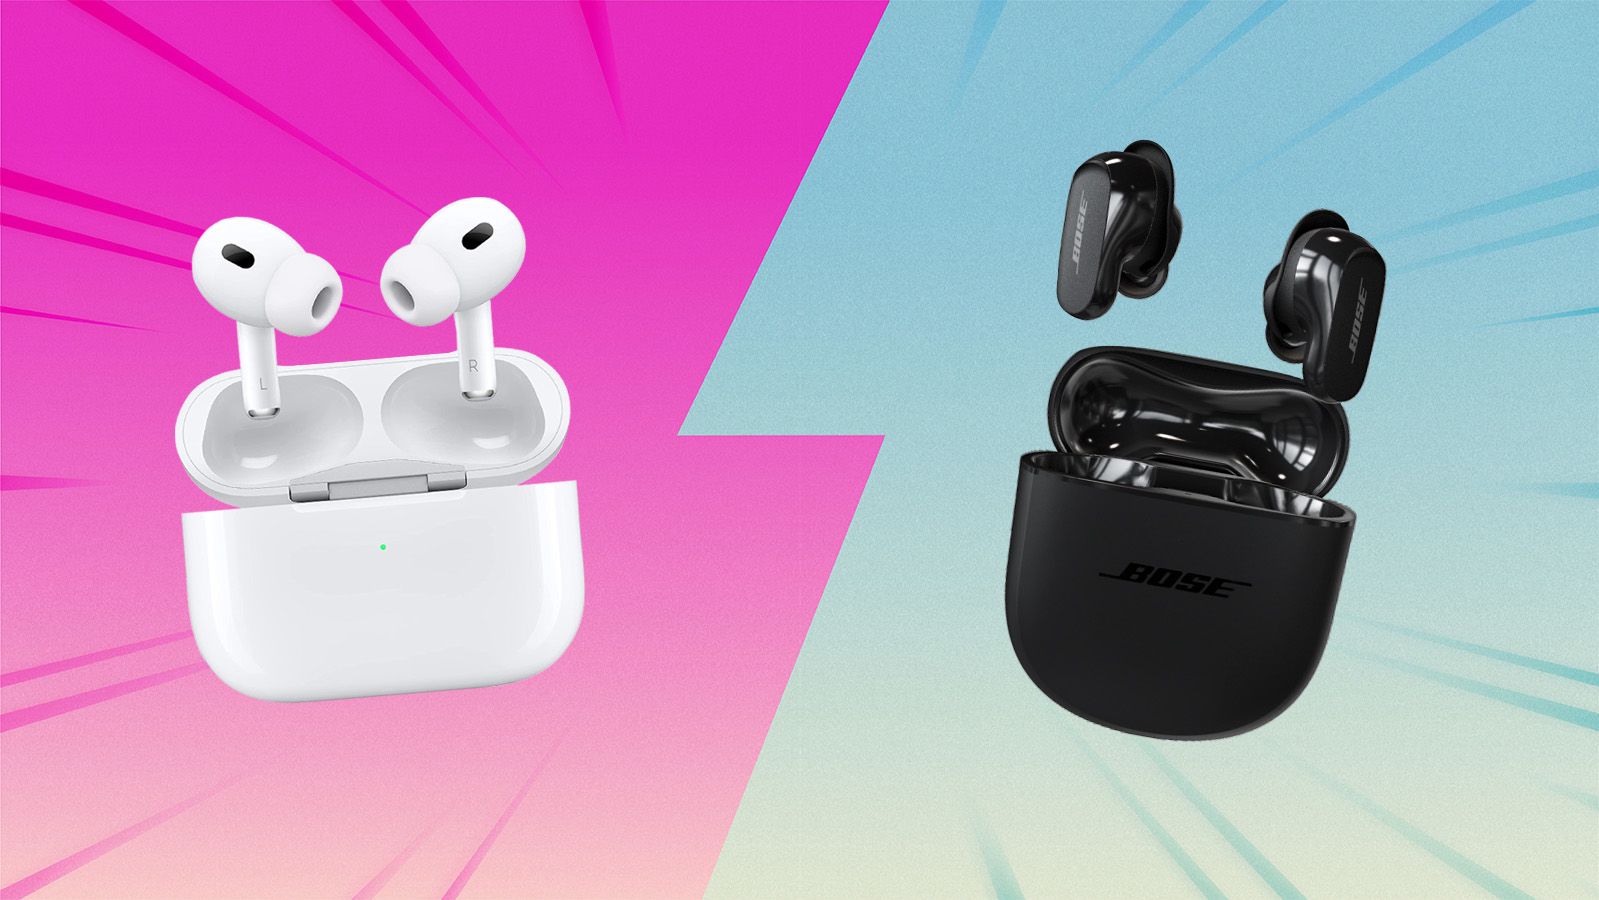 Forget the AirPods Pro: These $249 earbuds are my new go-to for